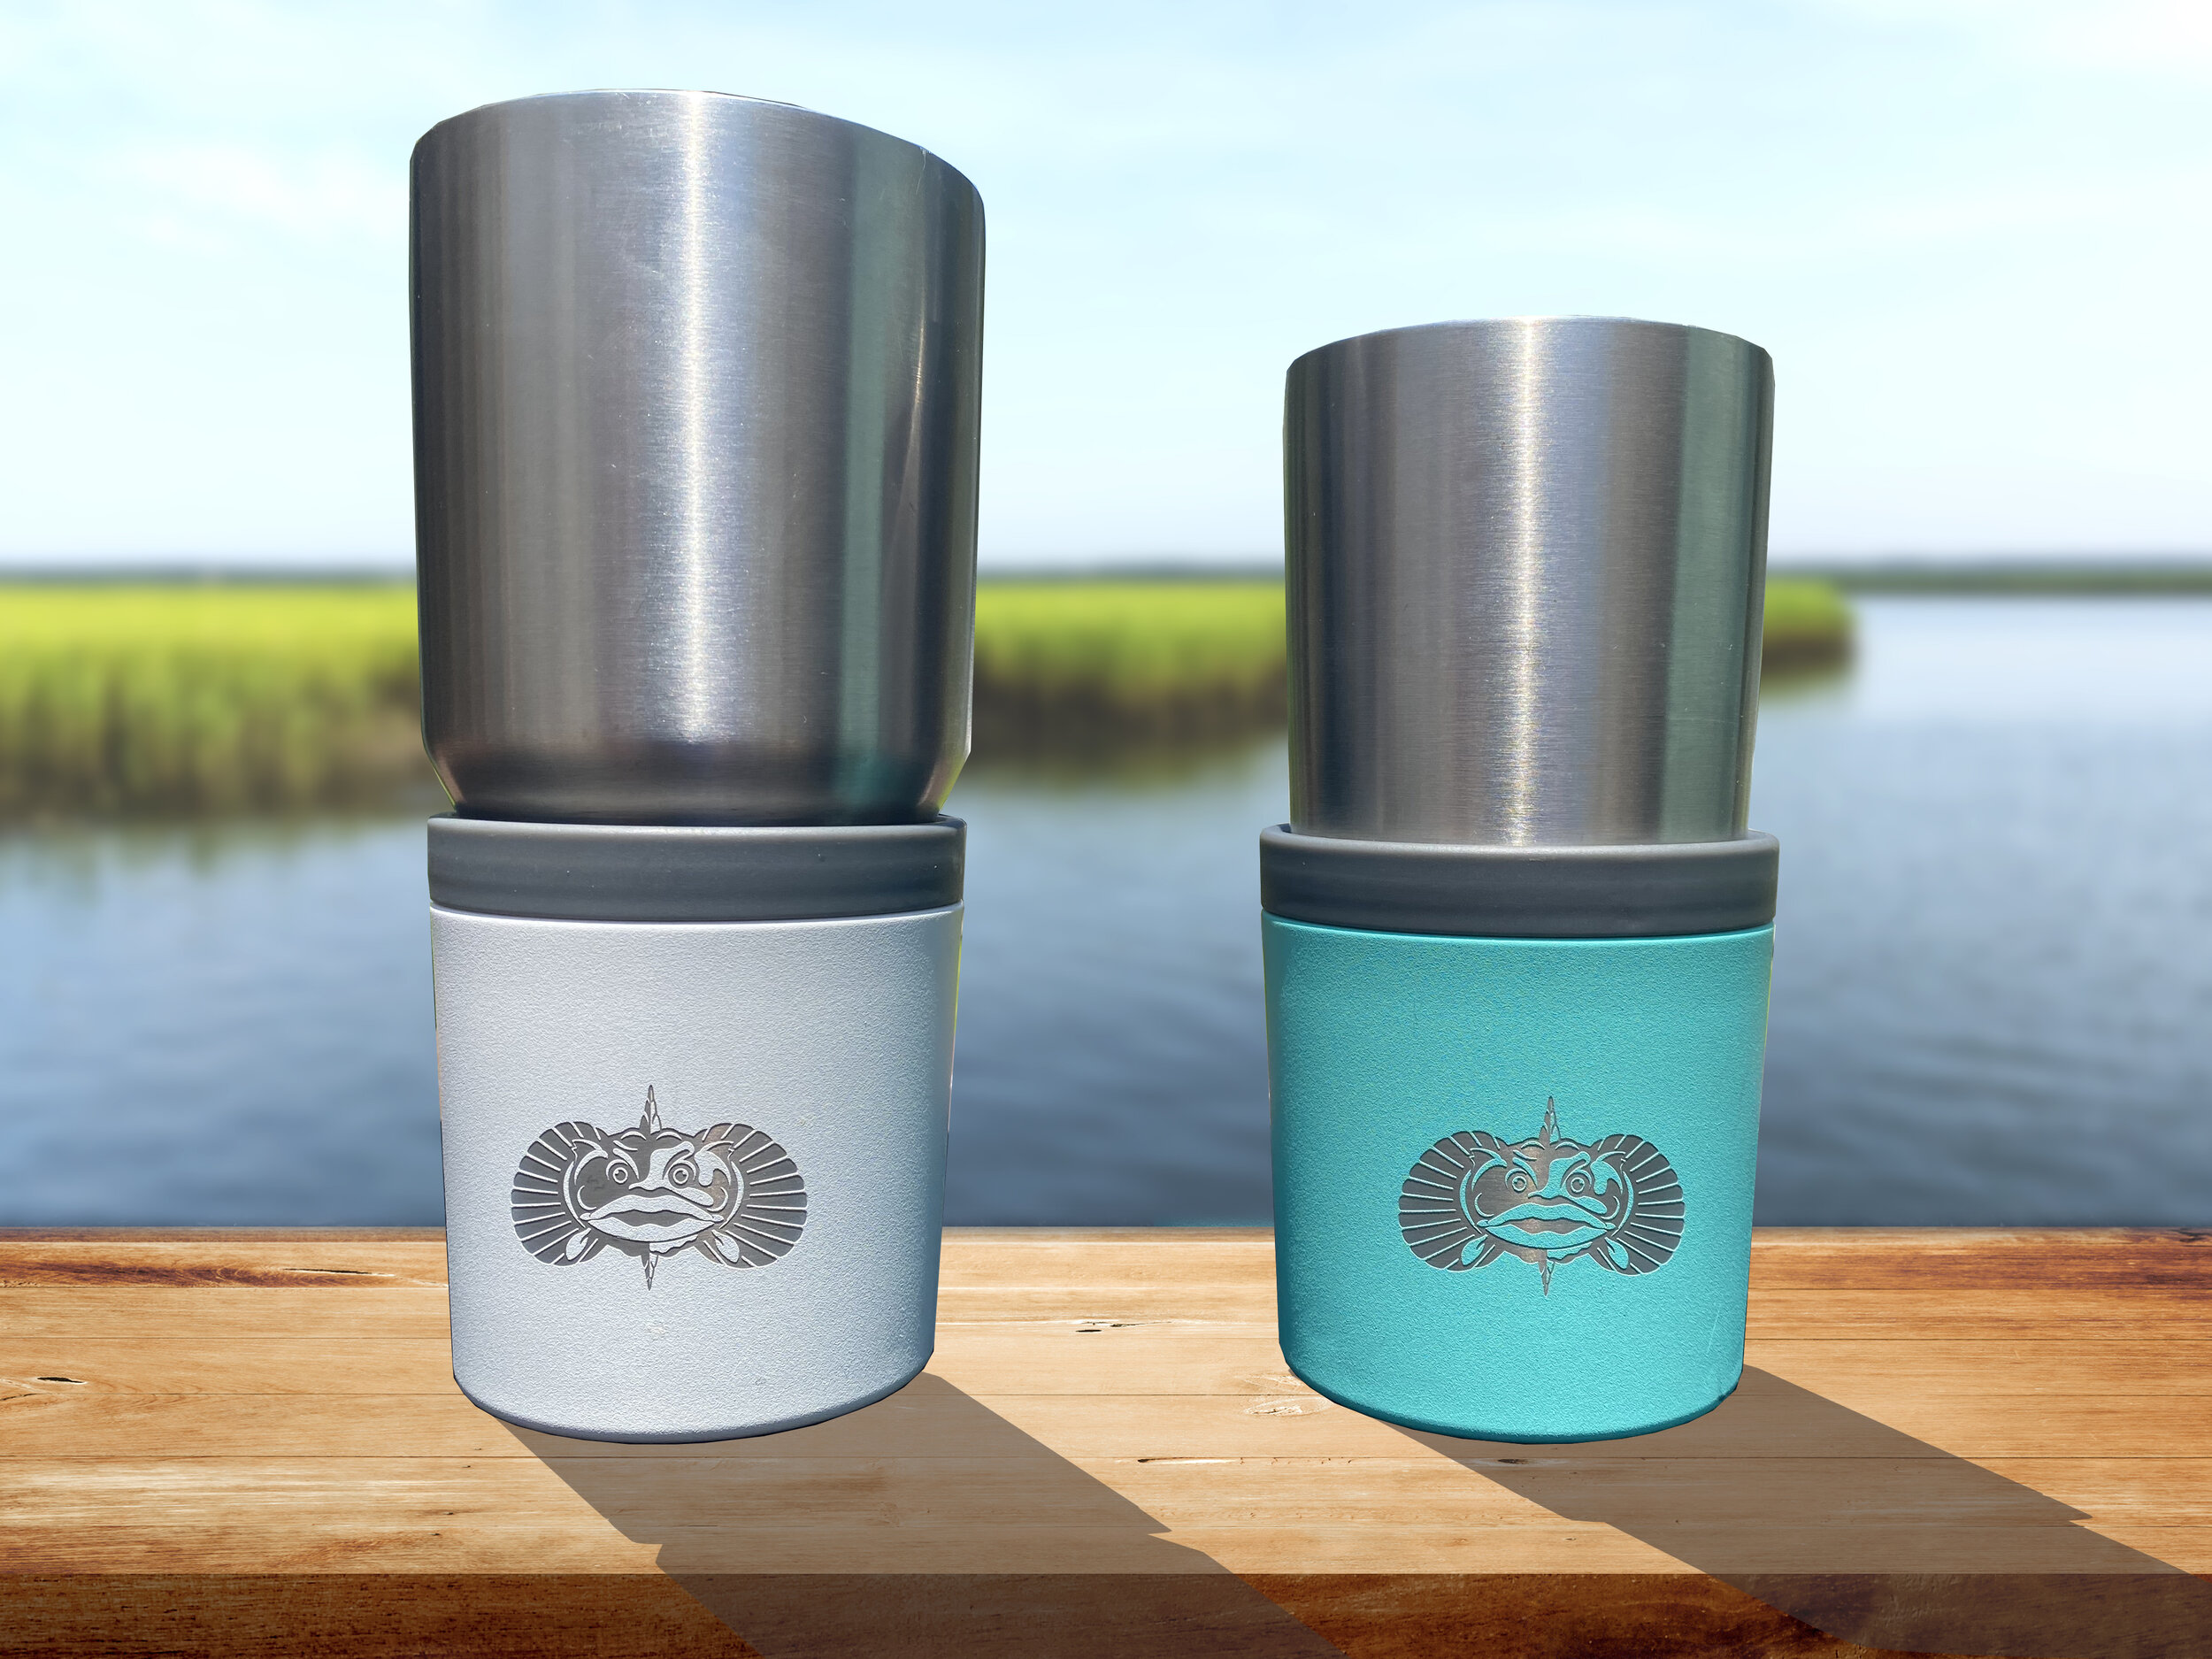 Toadfish Anchor  Universal Non-Tipping Cup Holder 